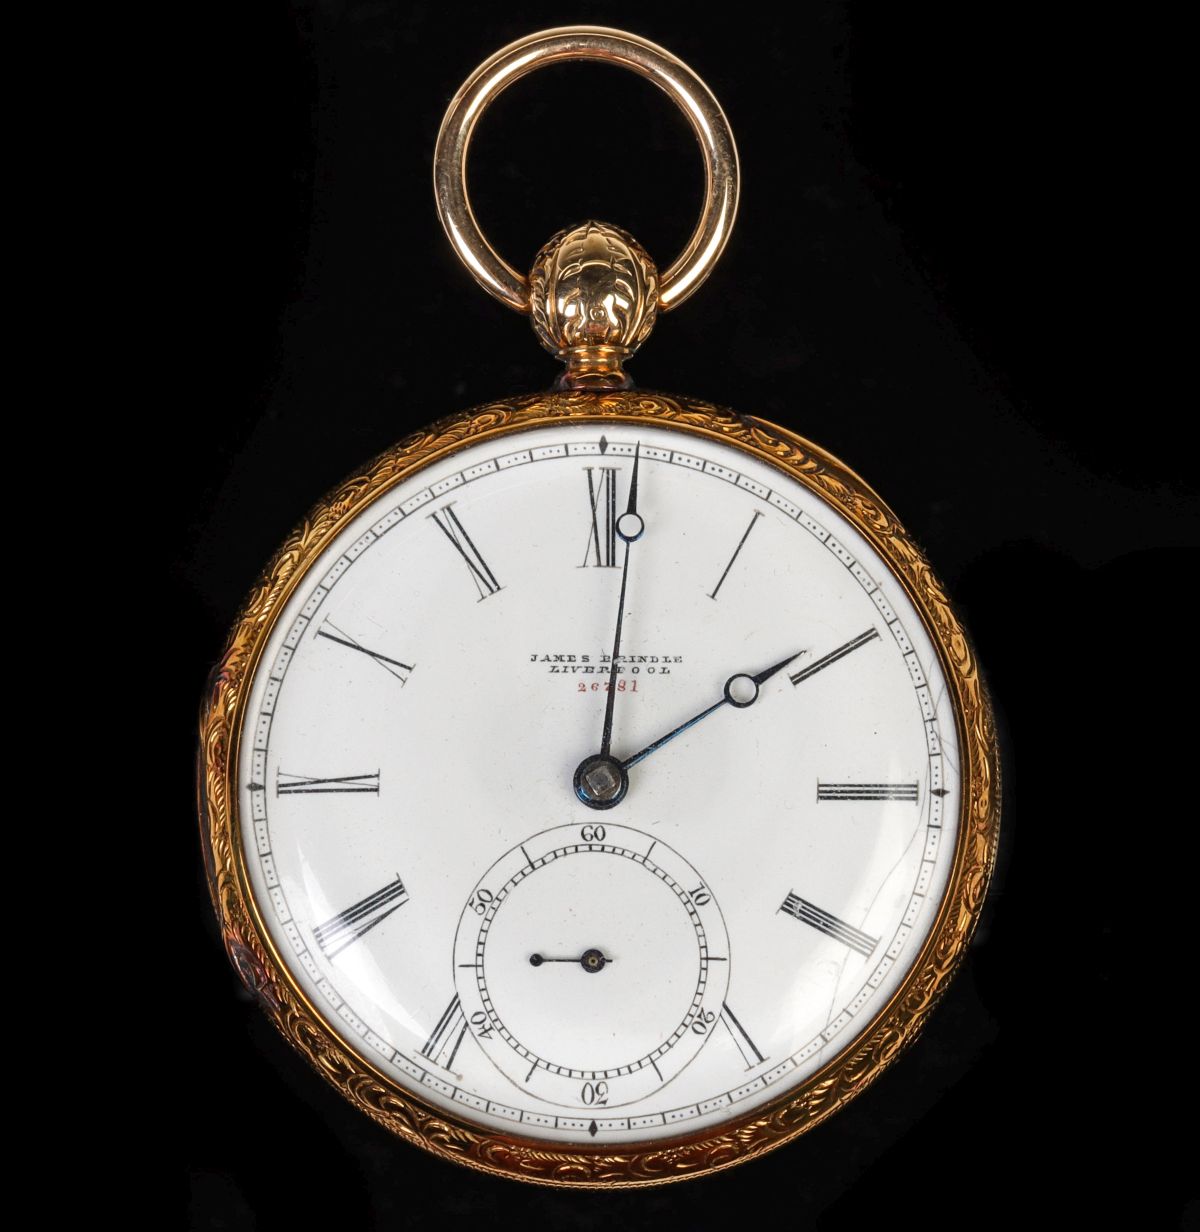 A JAMES PRINDLE FUSEE WATCH IN 14K GOLD CASE